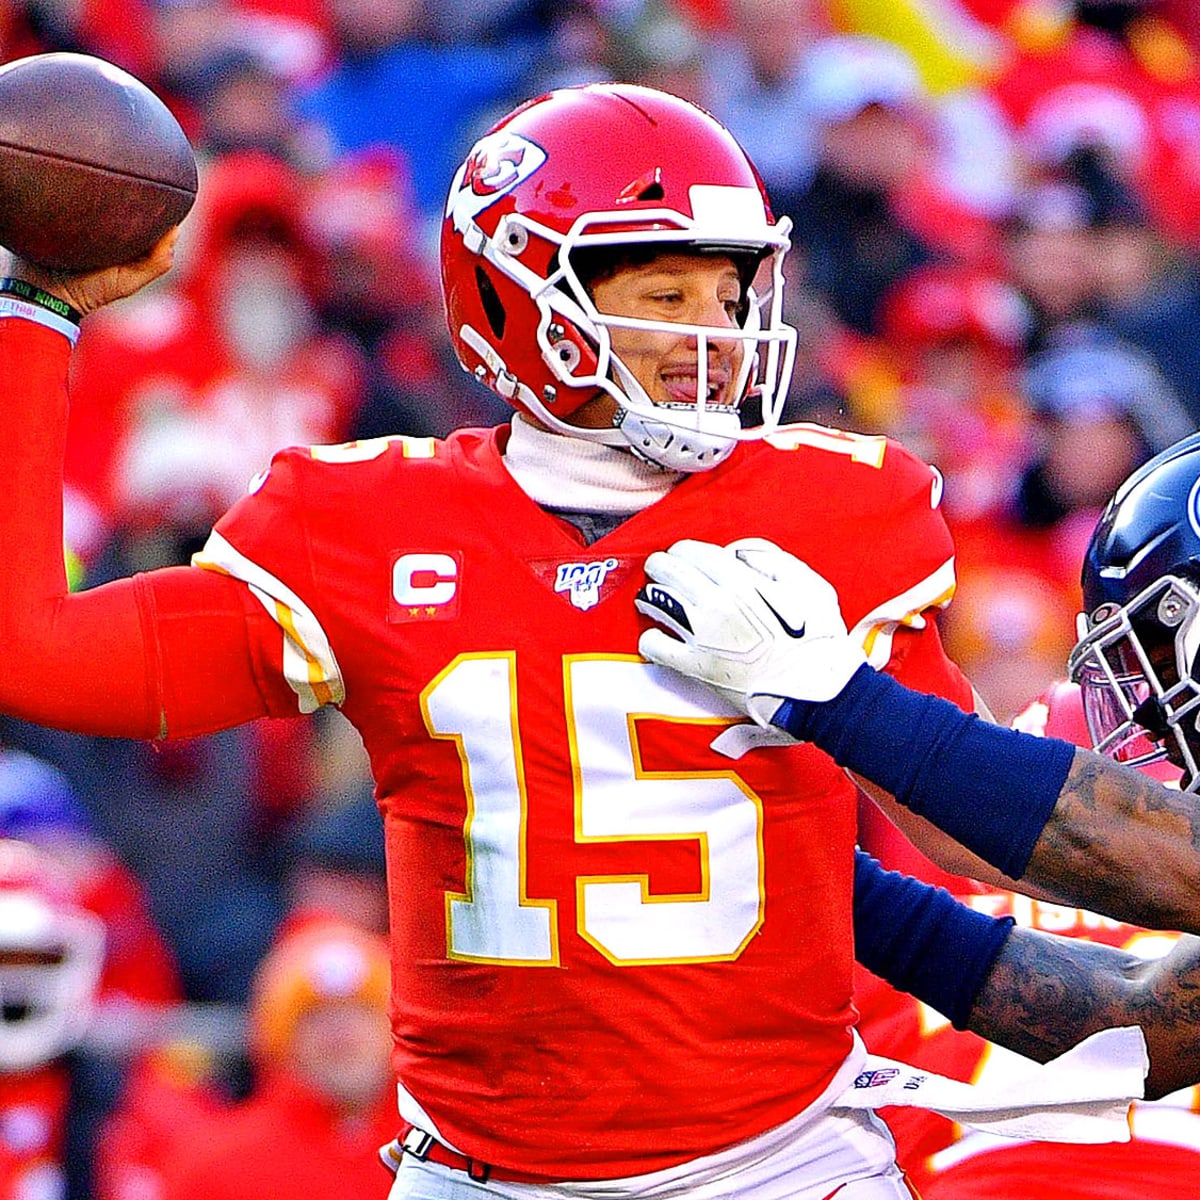 Patrick Mahomes was destined for the big leagues . . . until he